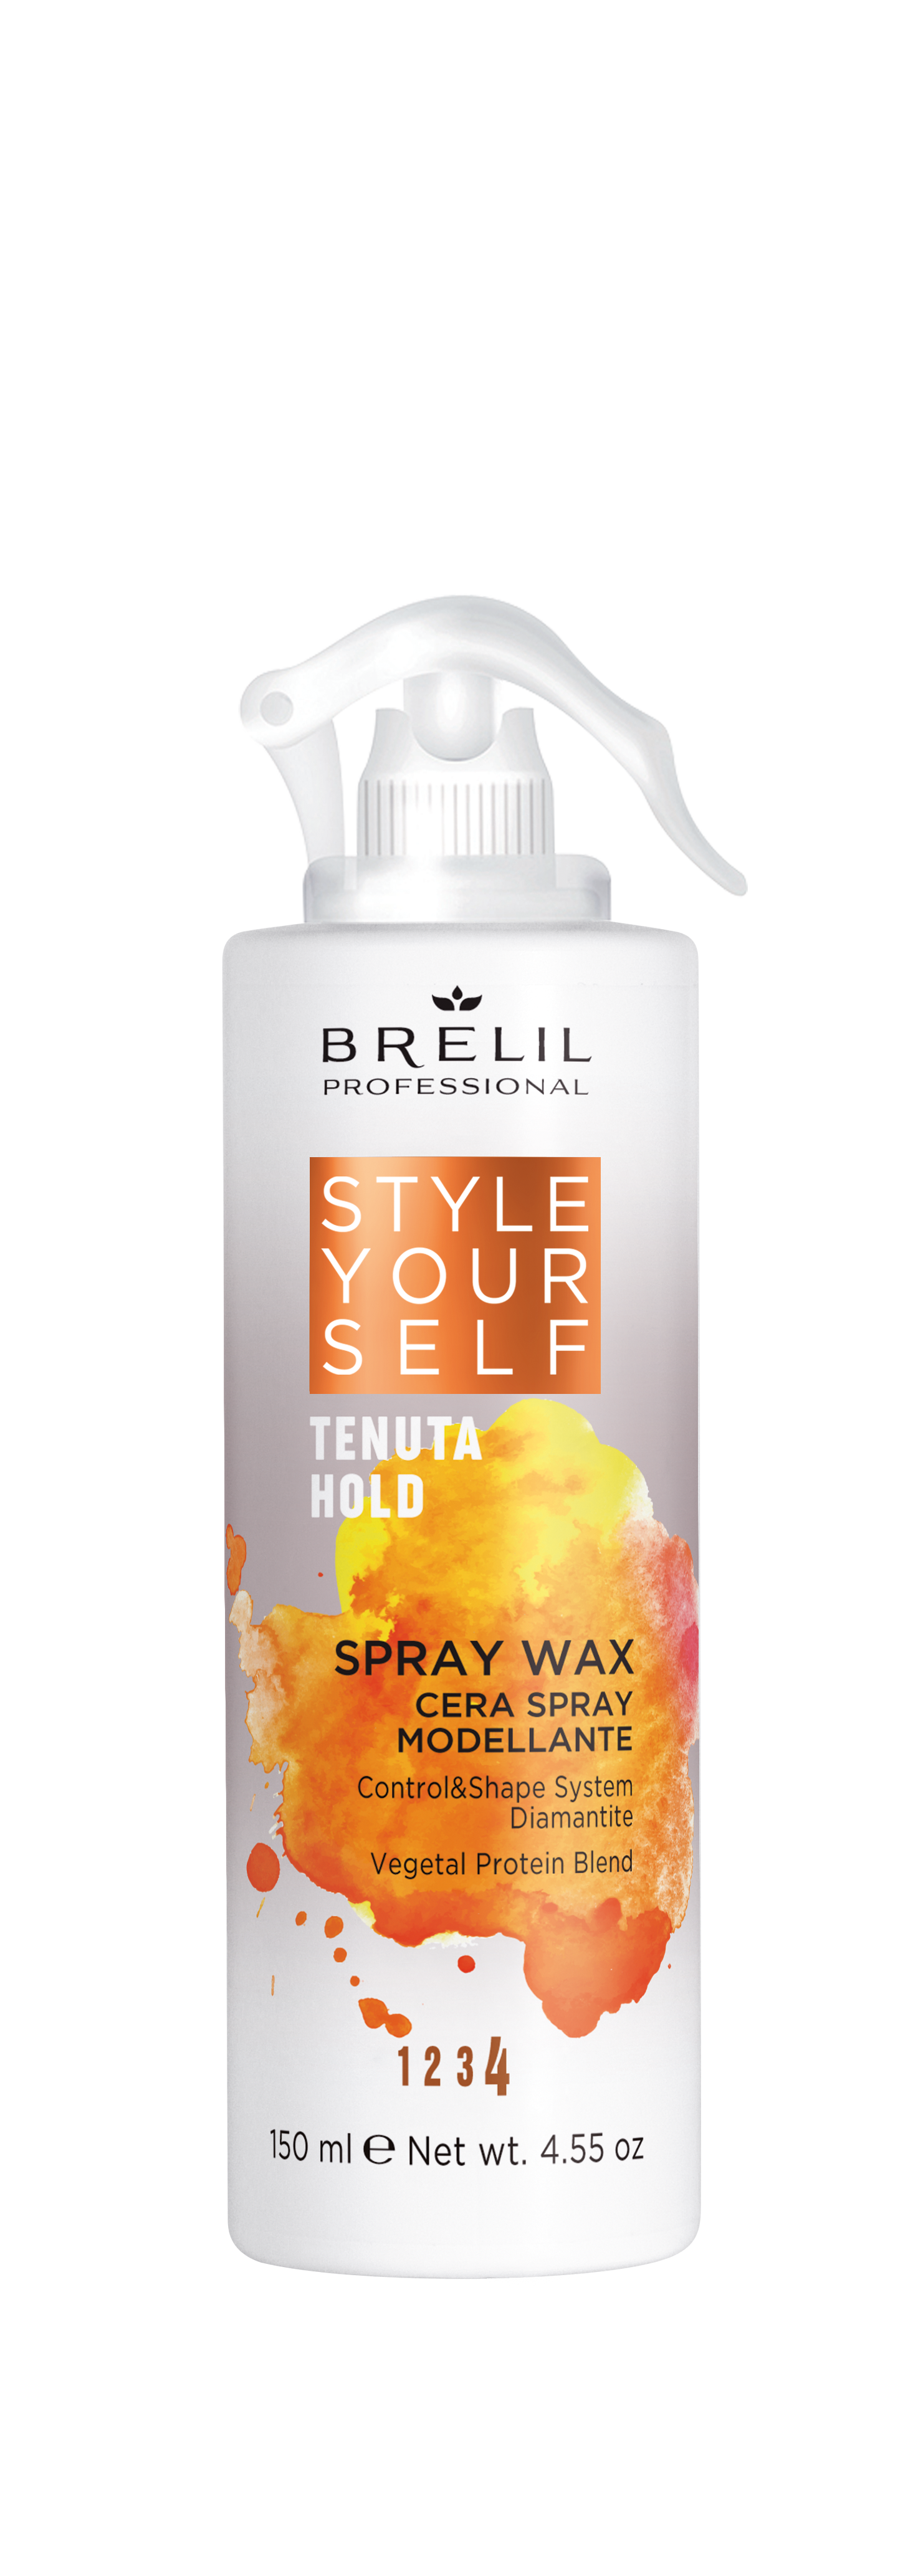 STYLE YOURSELF HOLD SPRAY WAX